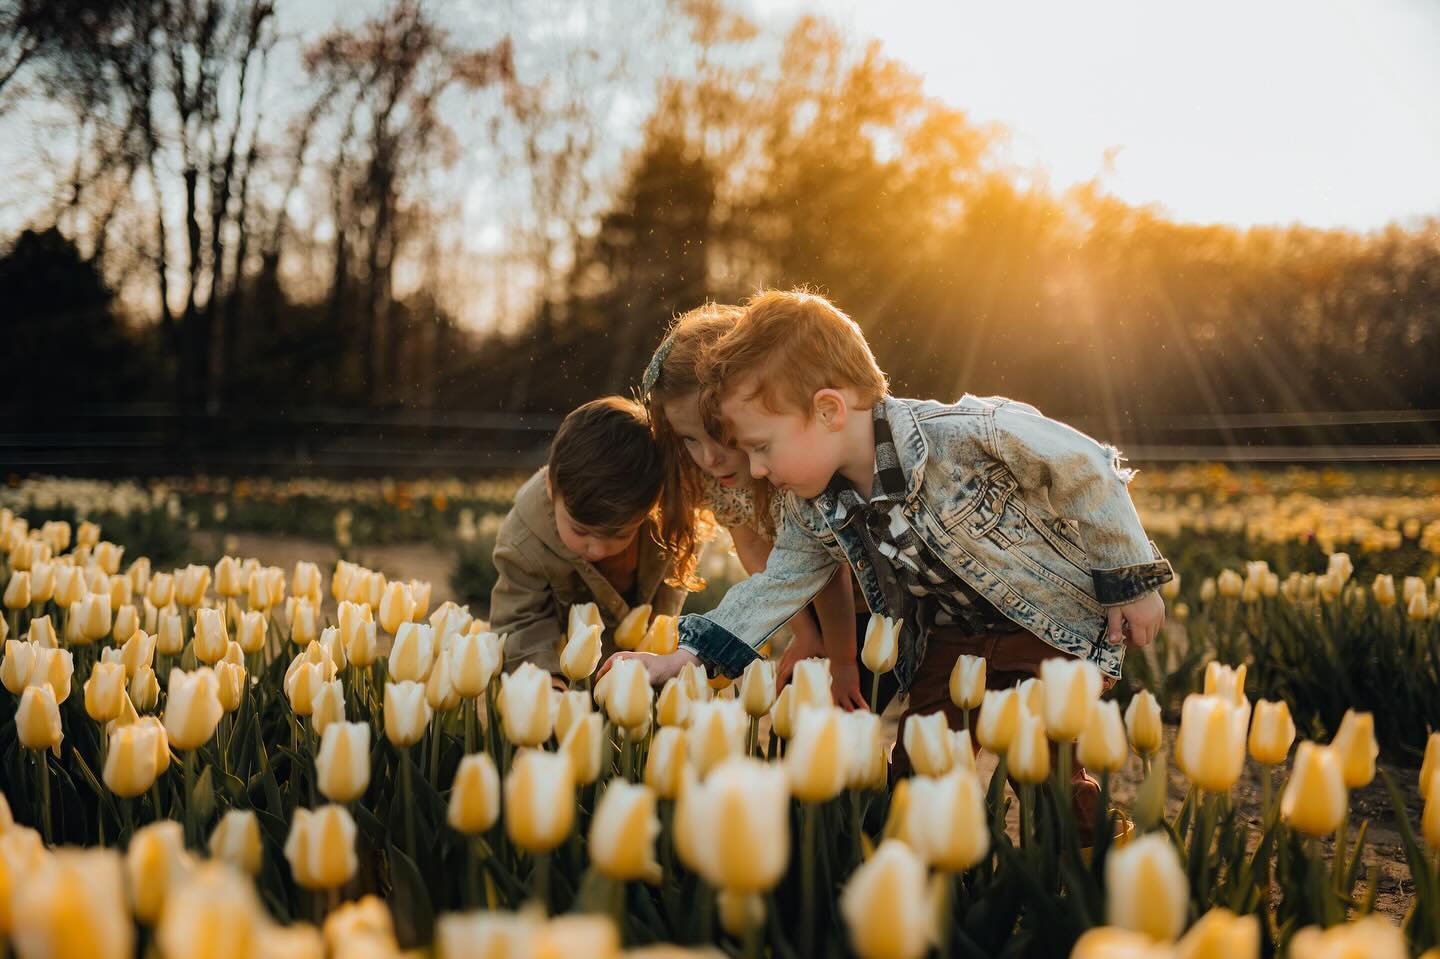 Last year, the season was so short and crappy that we missed out on our annual @goldenhourtulips visit. We weren&rsquo;t about to make that same mistake this year!⁣
⁣
The sun was a paid actor for this picture 😂 🌷⁣
⁣
🌱